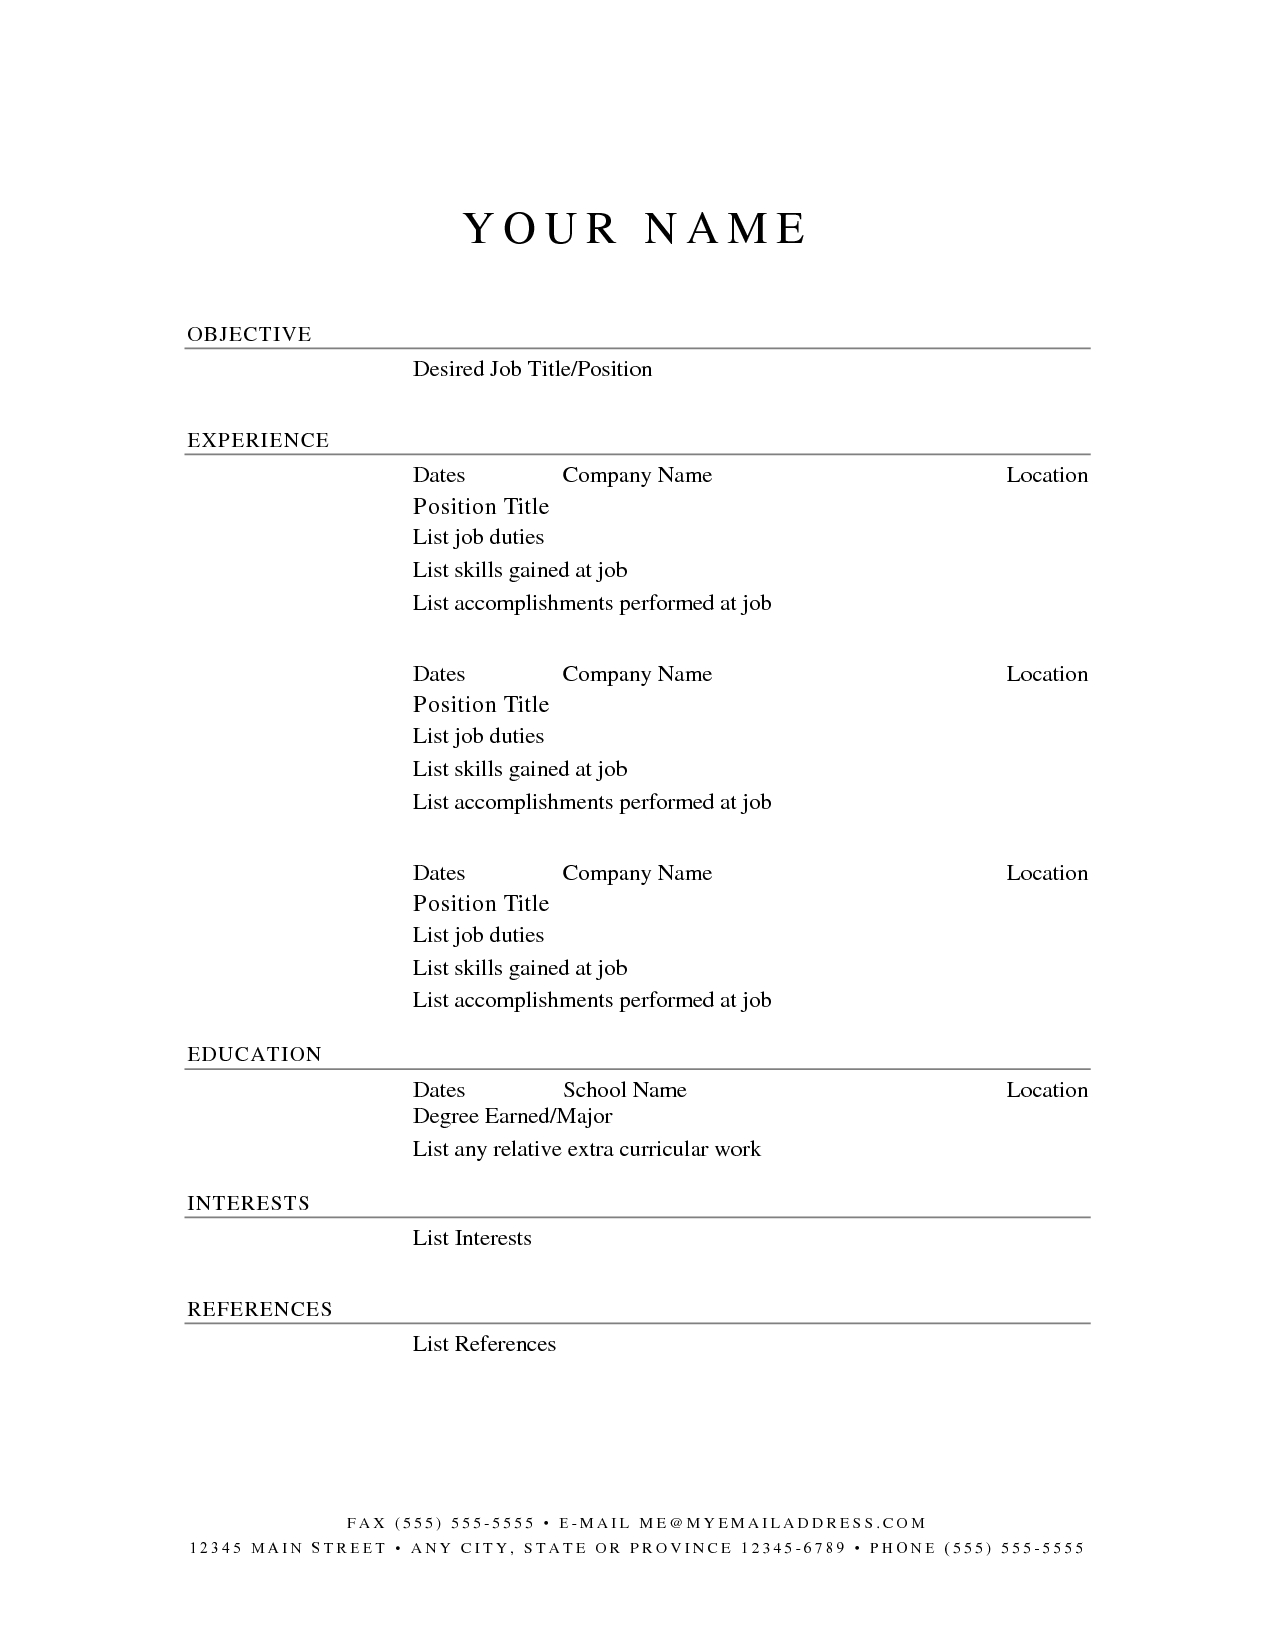 Resume Examples Printable | Resume Examples | Sample Resume - Free Printable Resume Templates